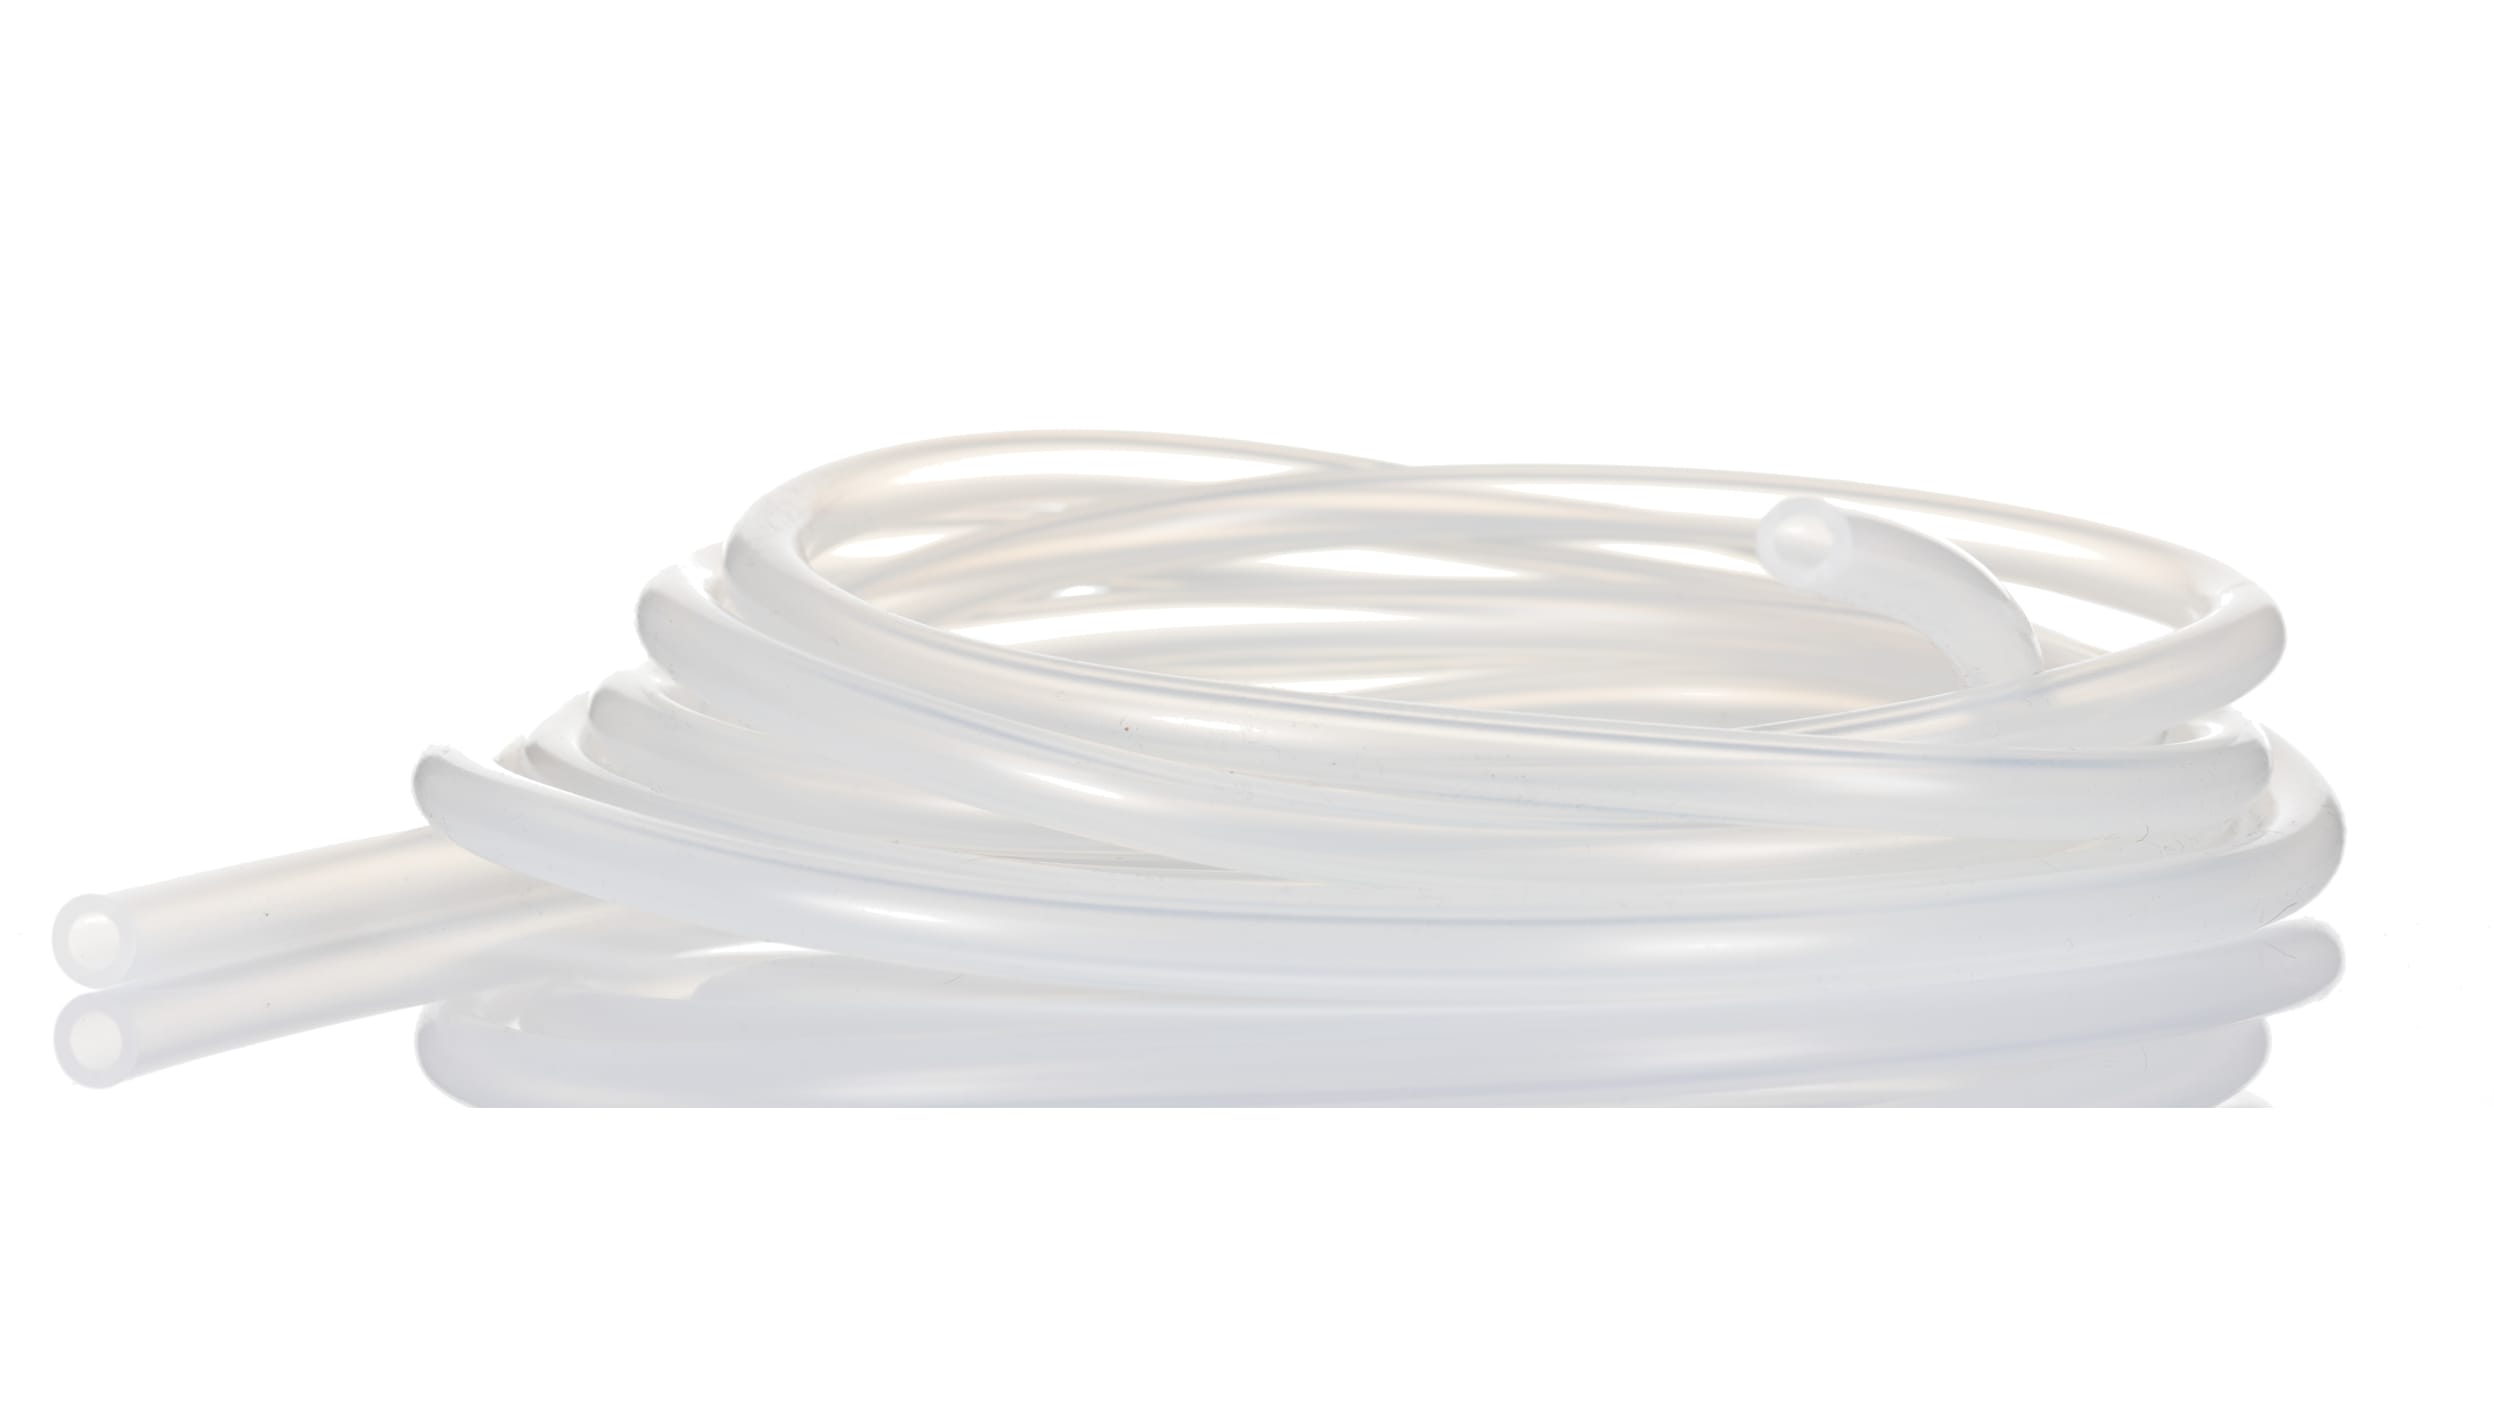 RS PRO, RS PRO Flexible Tube, PTFE, 4mm ID, 6mm OD, Clear, 50m, 186-0591